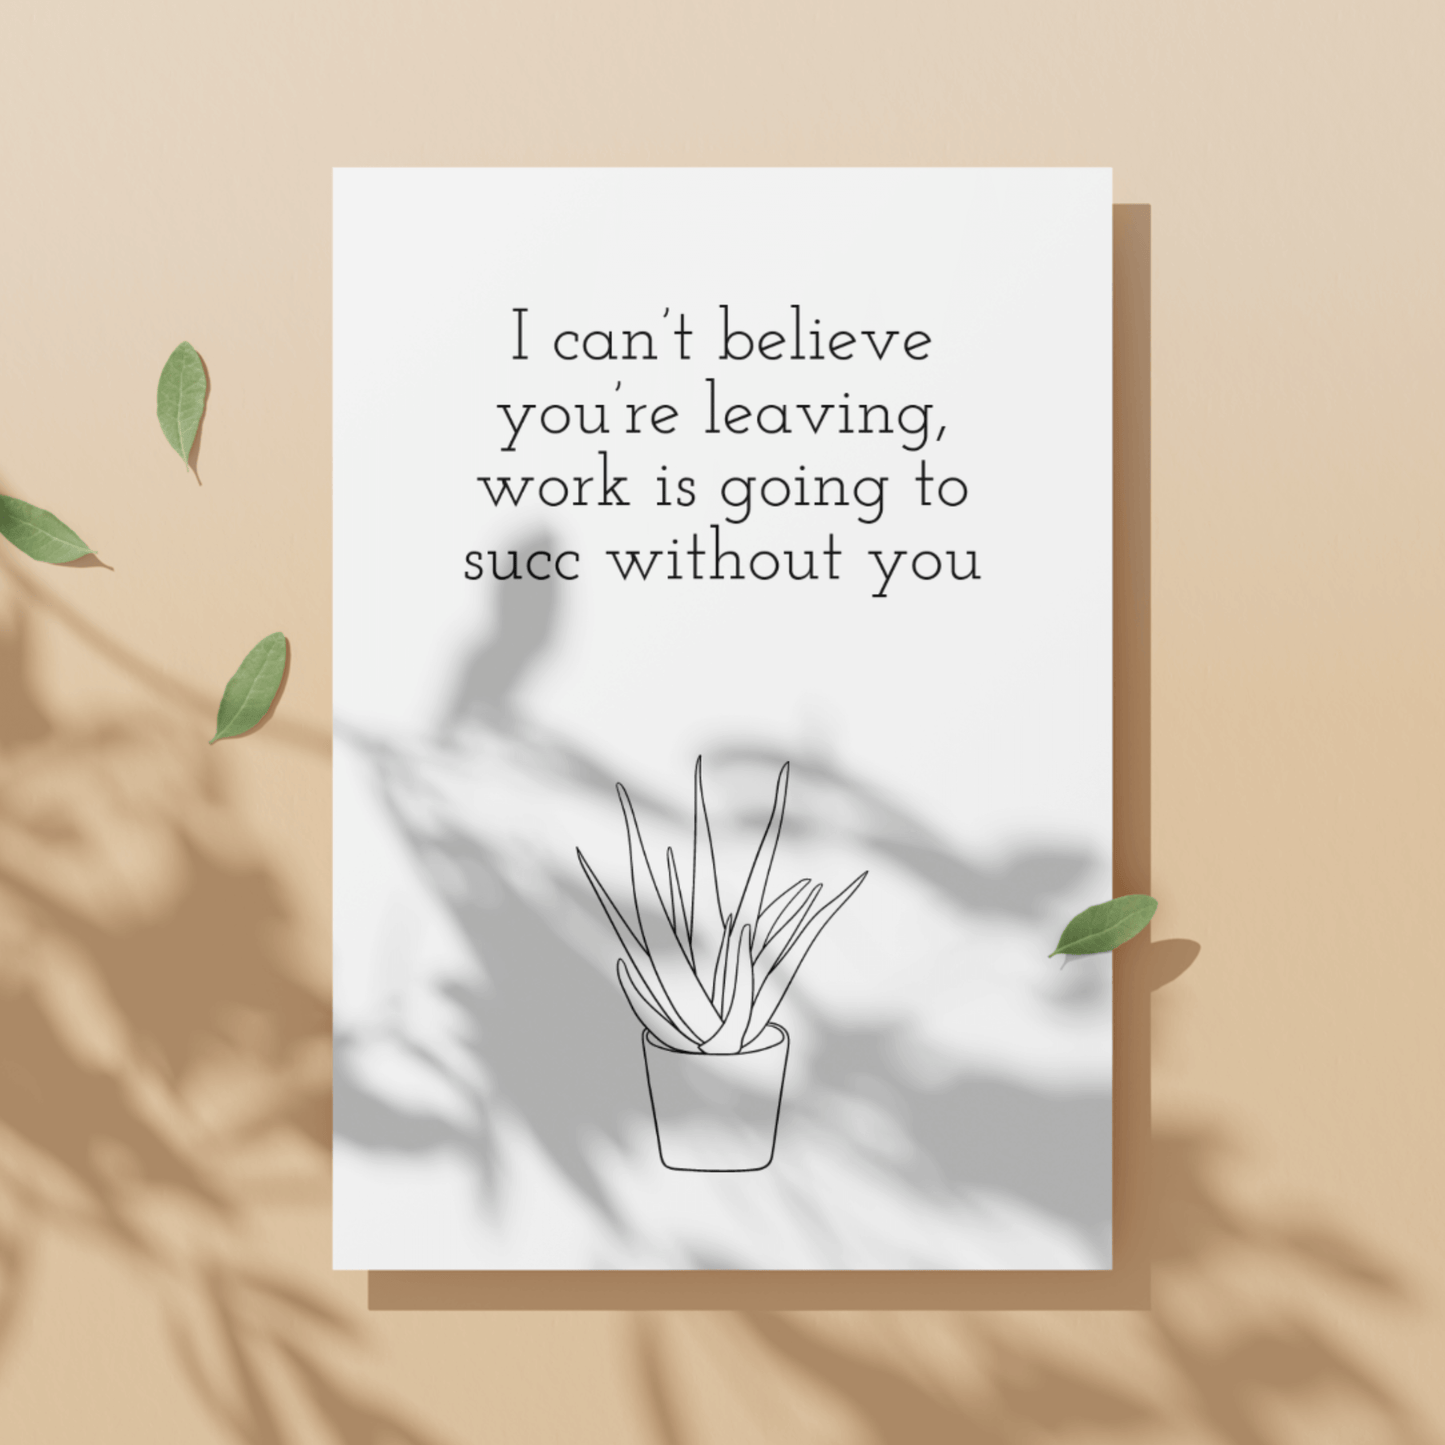 Little Kraken's I Can't Believe You're Leaving, Work is Going to Succ Without You | Funny Aloe Vera Leaving Retirement Card, Leaving Cards for £3.50 each